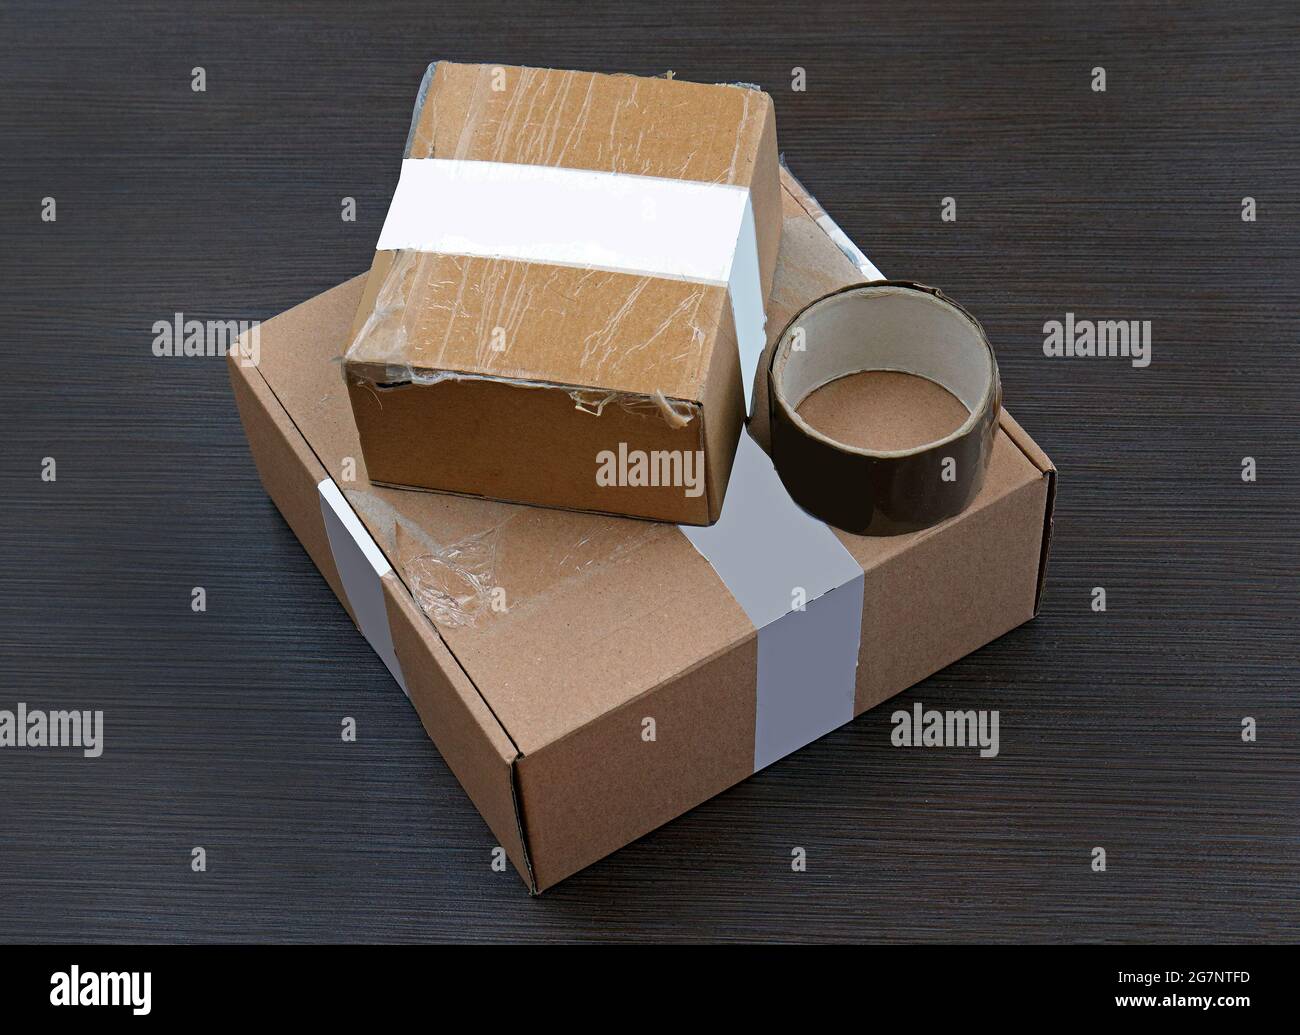 Packed cardboard boxes with duct tape on wooden surface ready for shipment  Stock Photo - Alamy